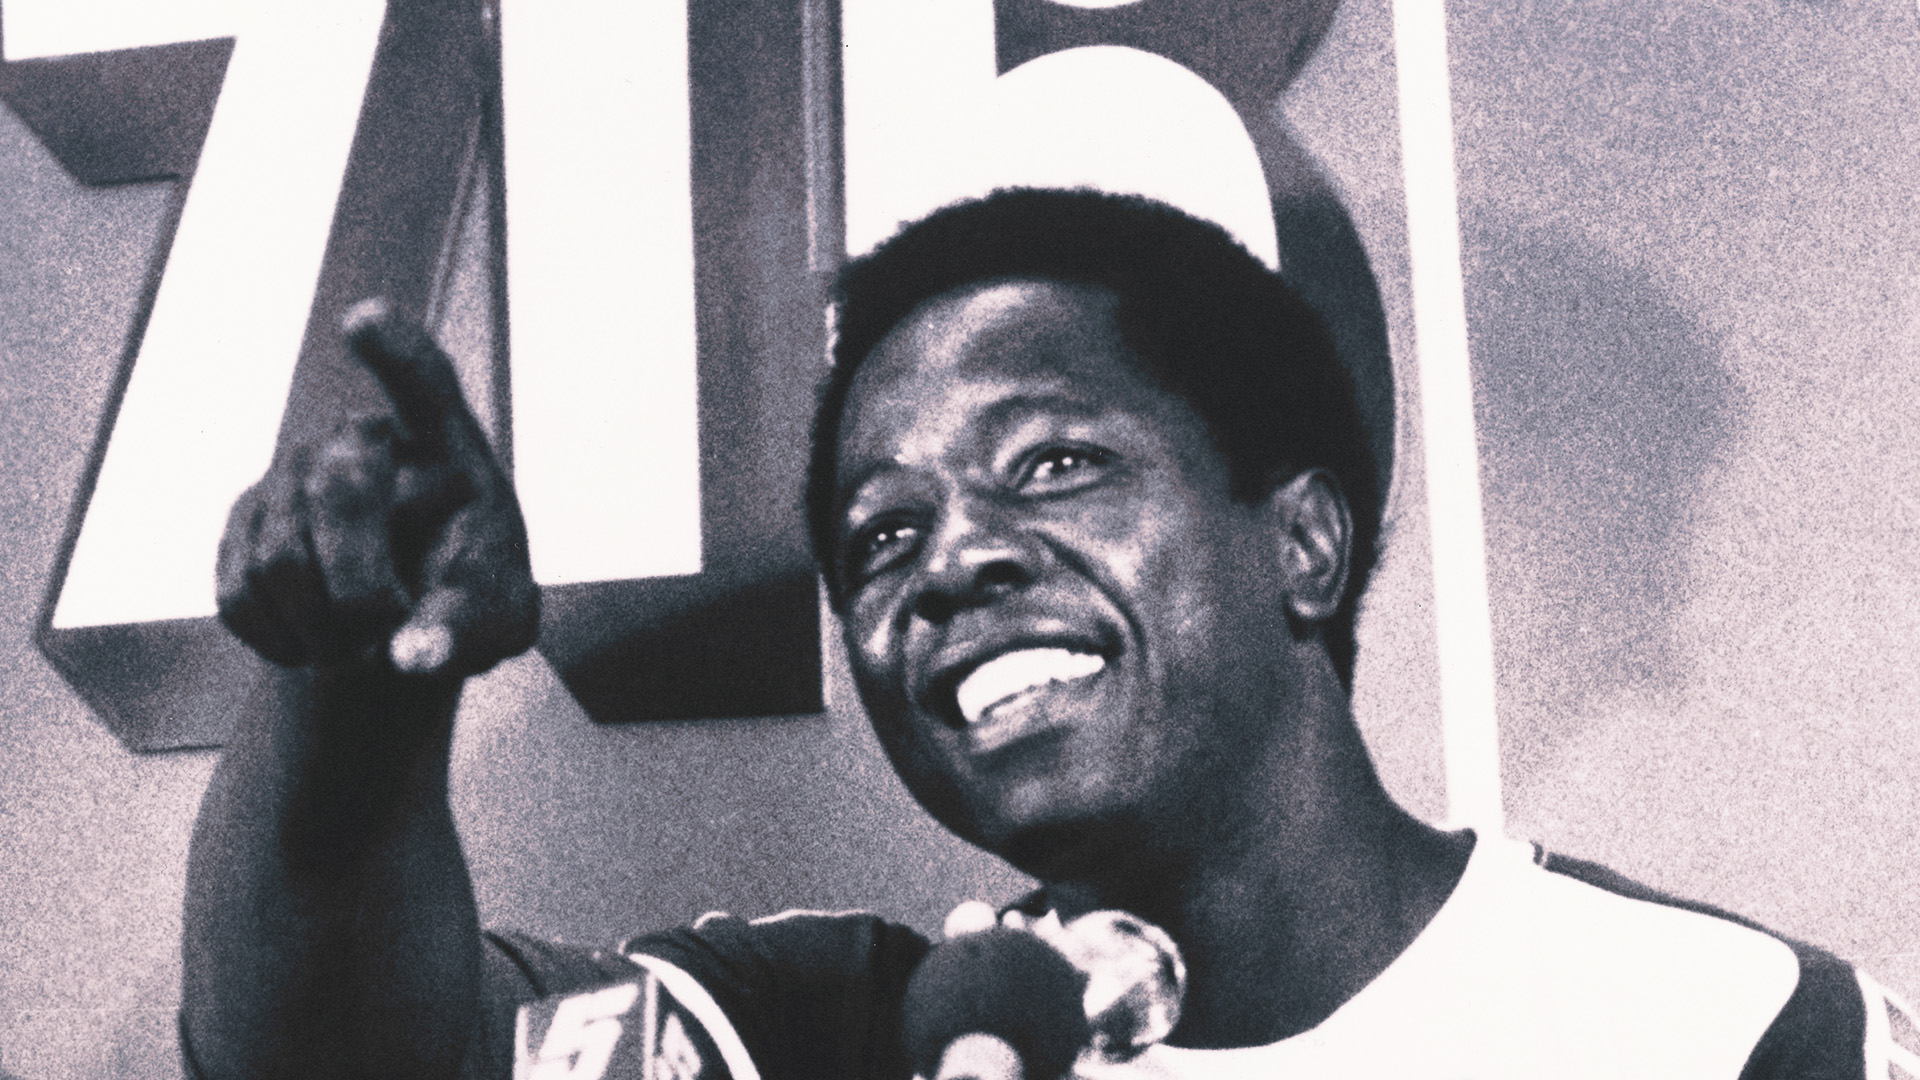 Baseball Hall of Fame announces Hank Aaron statue on 50th anniversary of his 715th home run